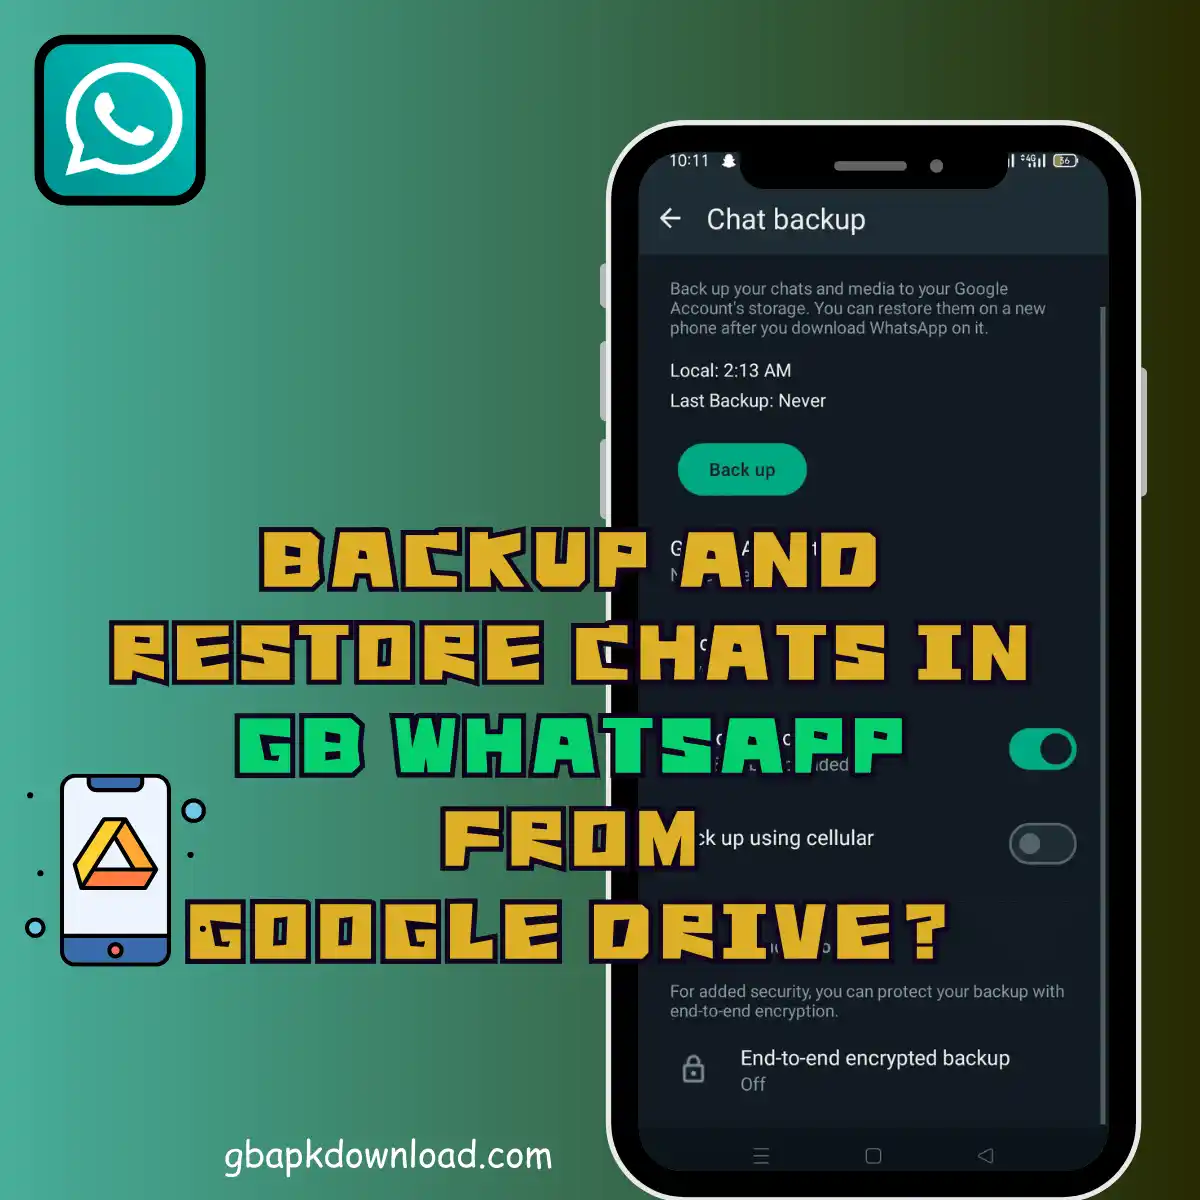 Backup and restore chats in GB WhatsApp from Google Drive?